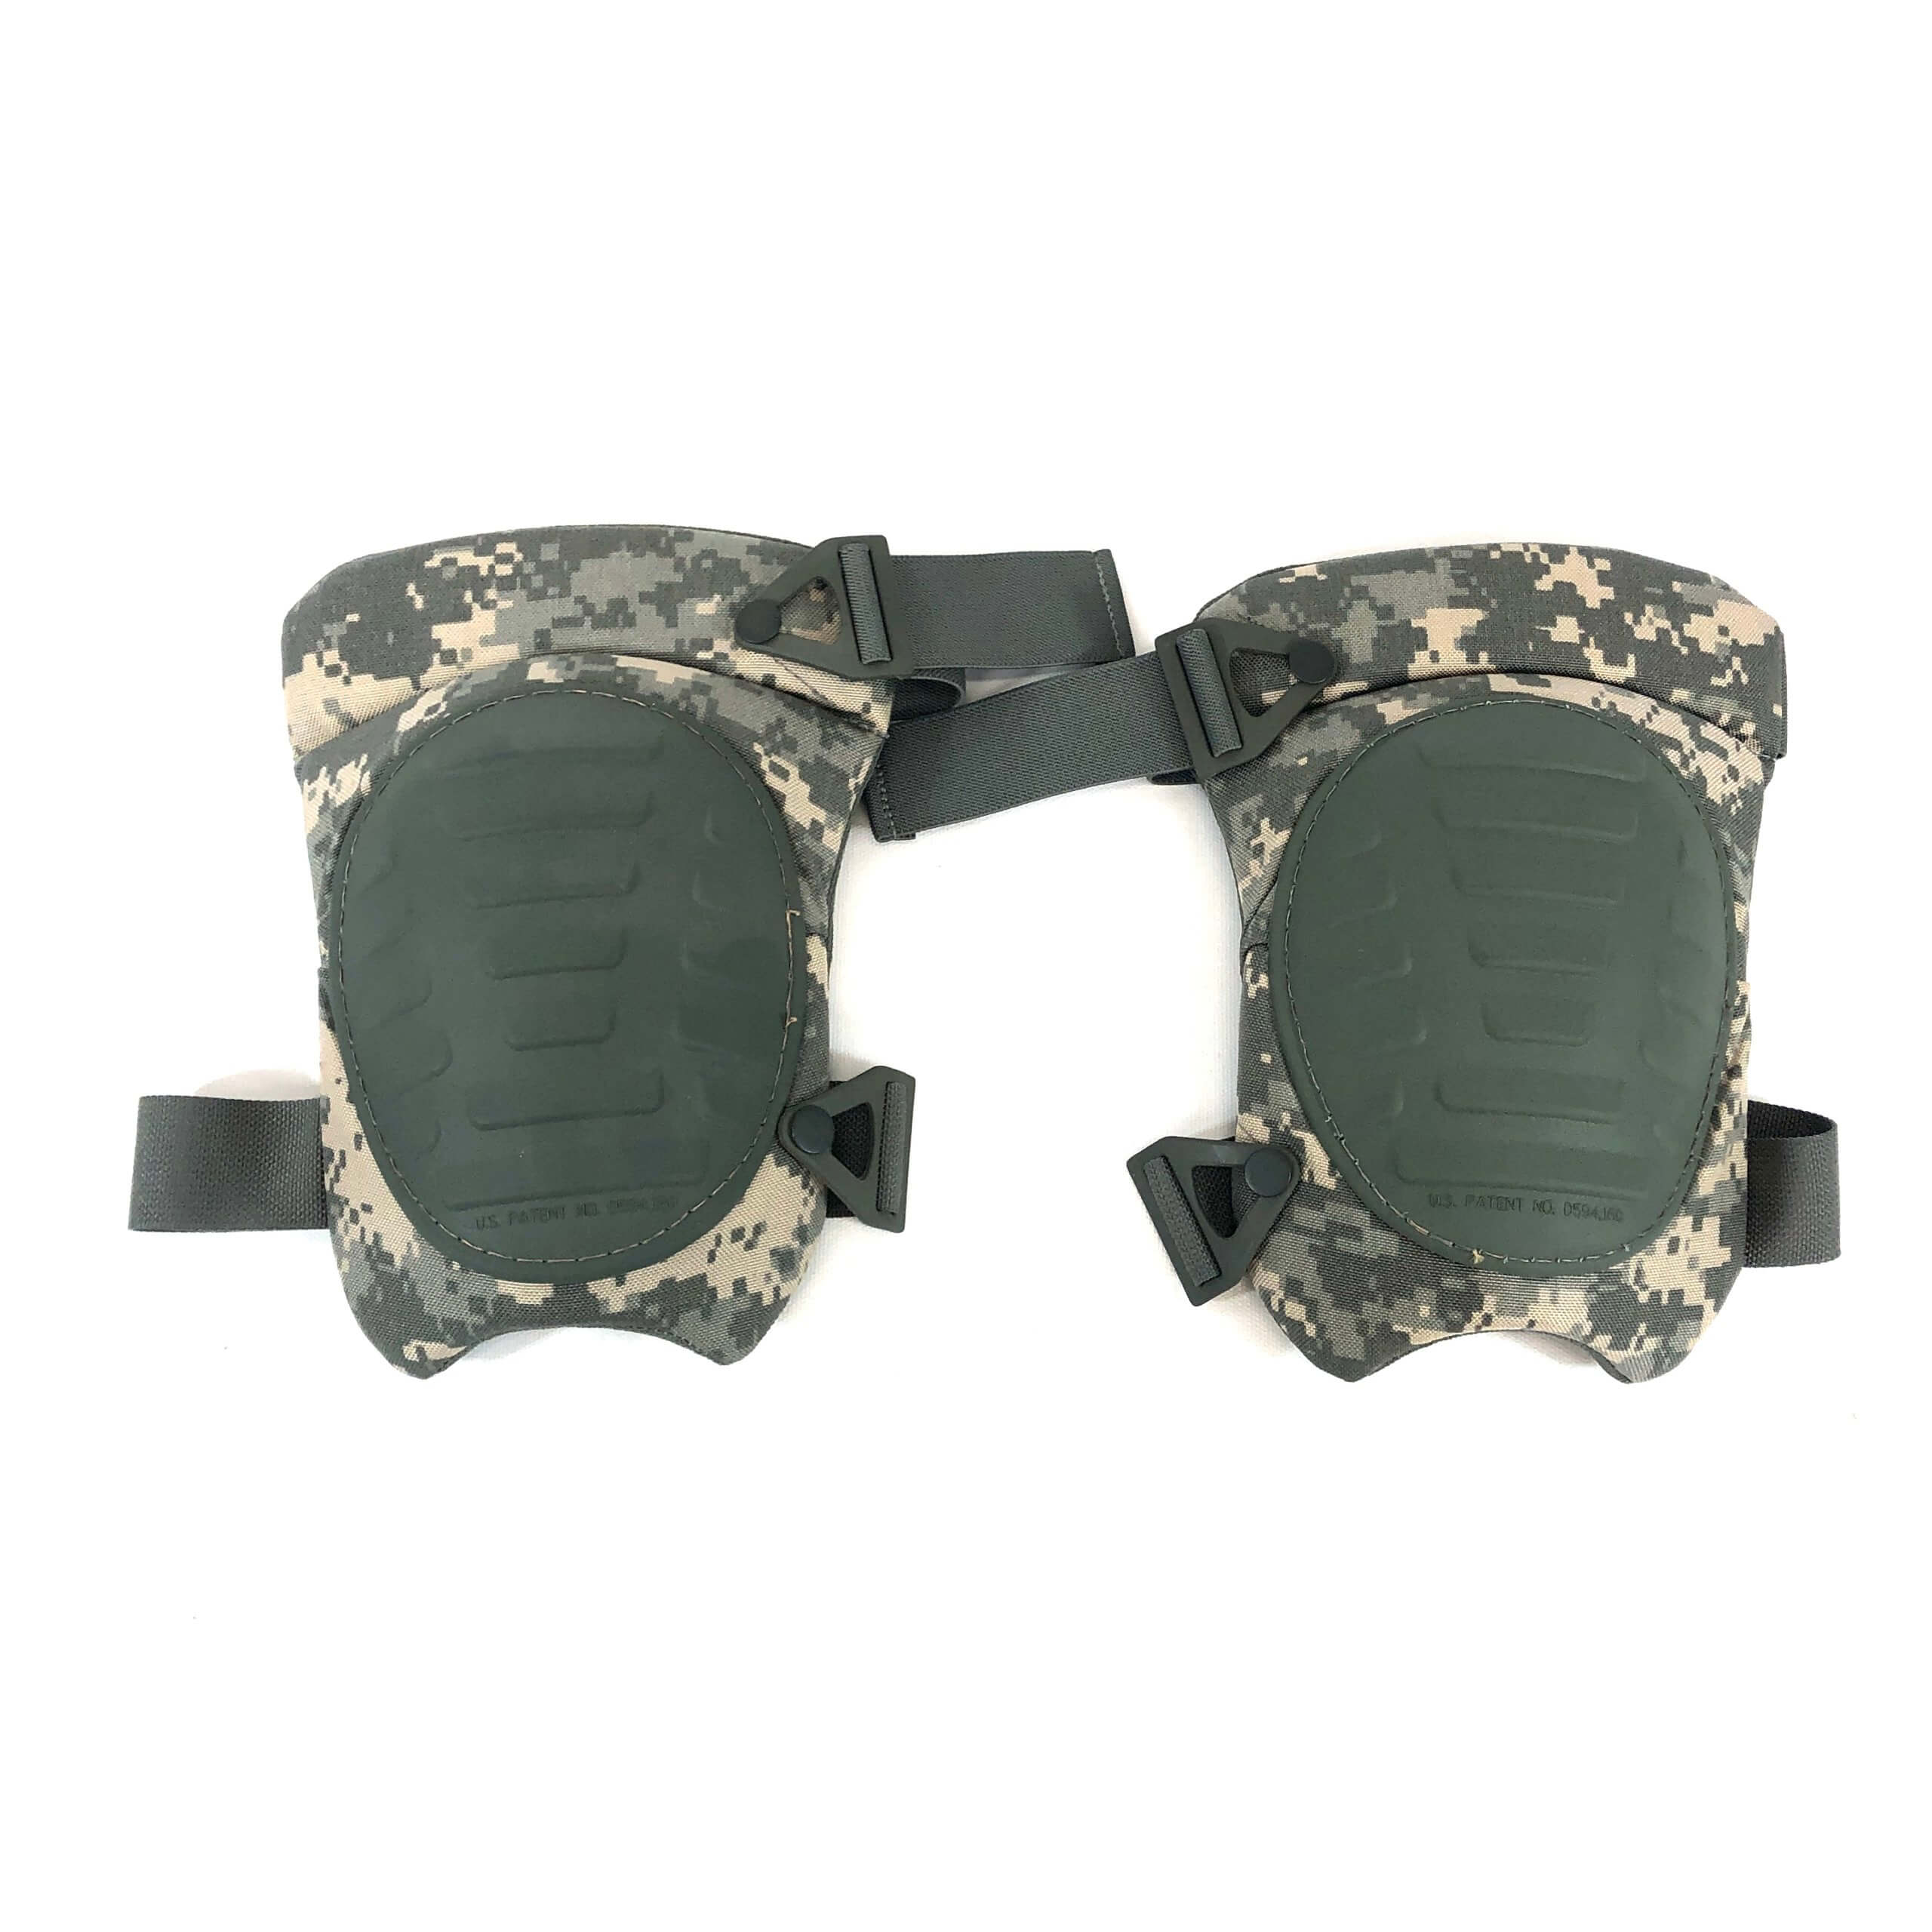 McGuire-Nicholas ELBOW & KNEE PAD BLACK & CAMO TACTICAL MADE IN THE USA Military 